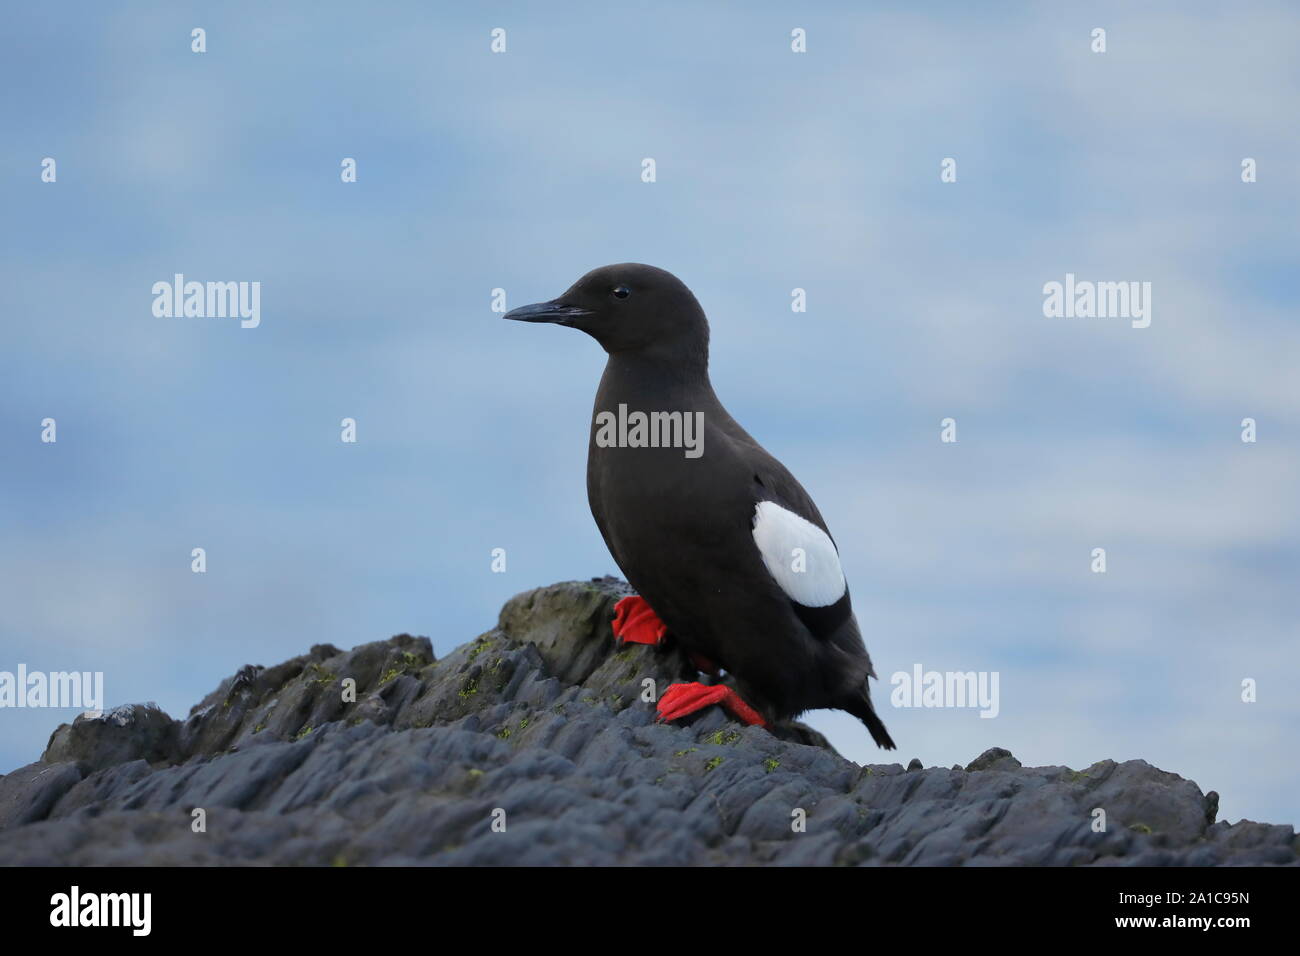 The black guillemot or tystie is a medium-sized seabird of the alcid family, Alcidae, native throughout northern Atlantic coasts and North America. Stock Photo